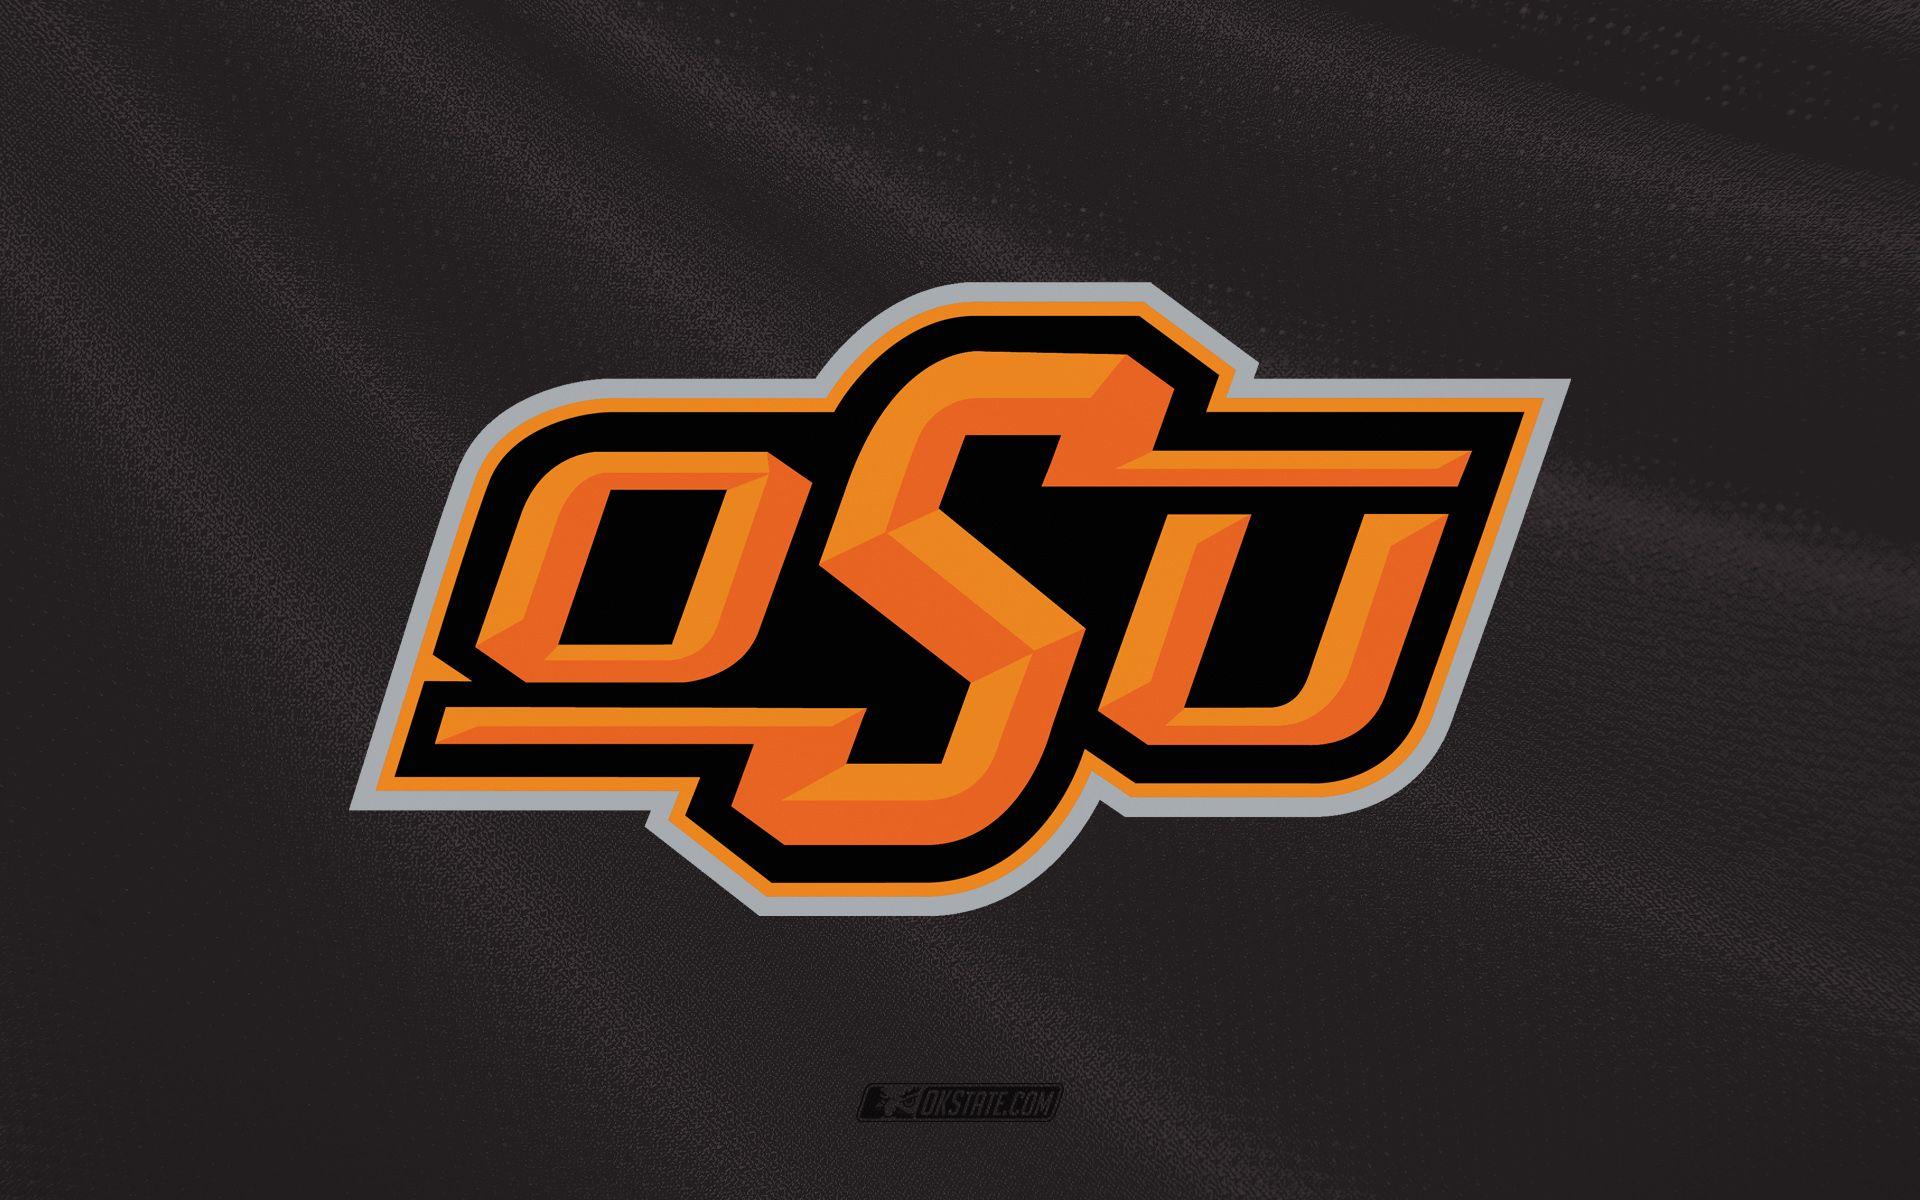 Oklahoma State Wallpapers Top Free Oklahoma State Backgrounds